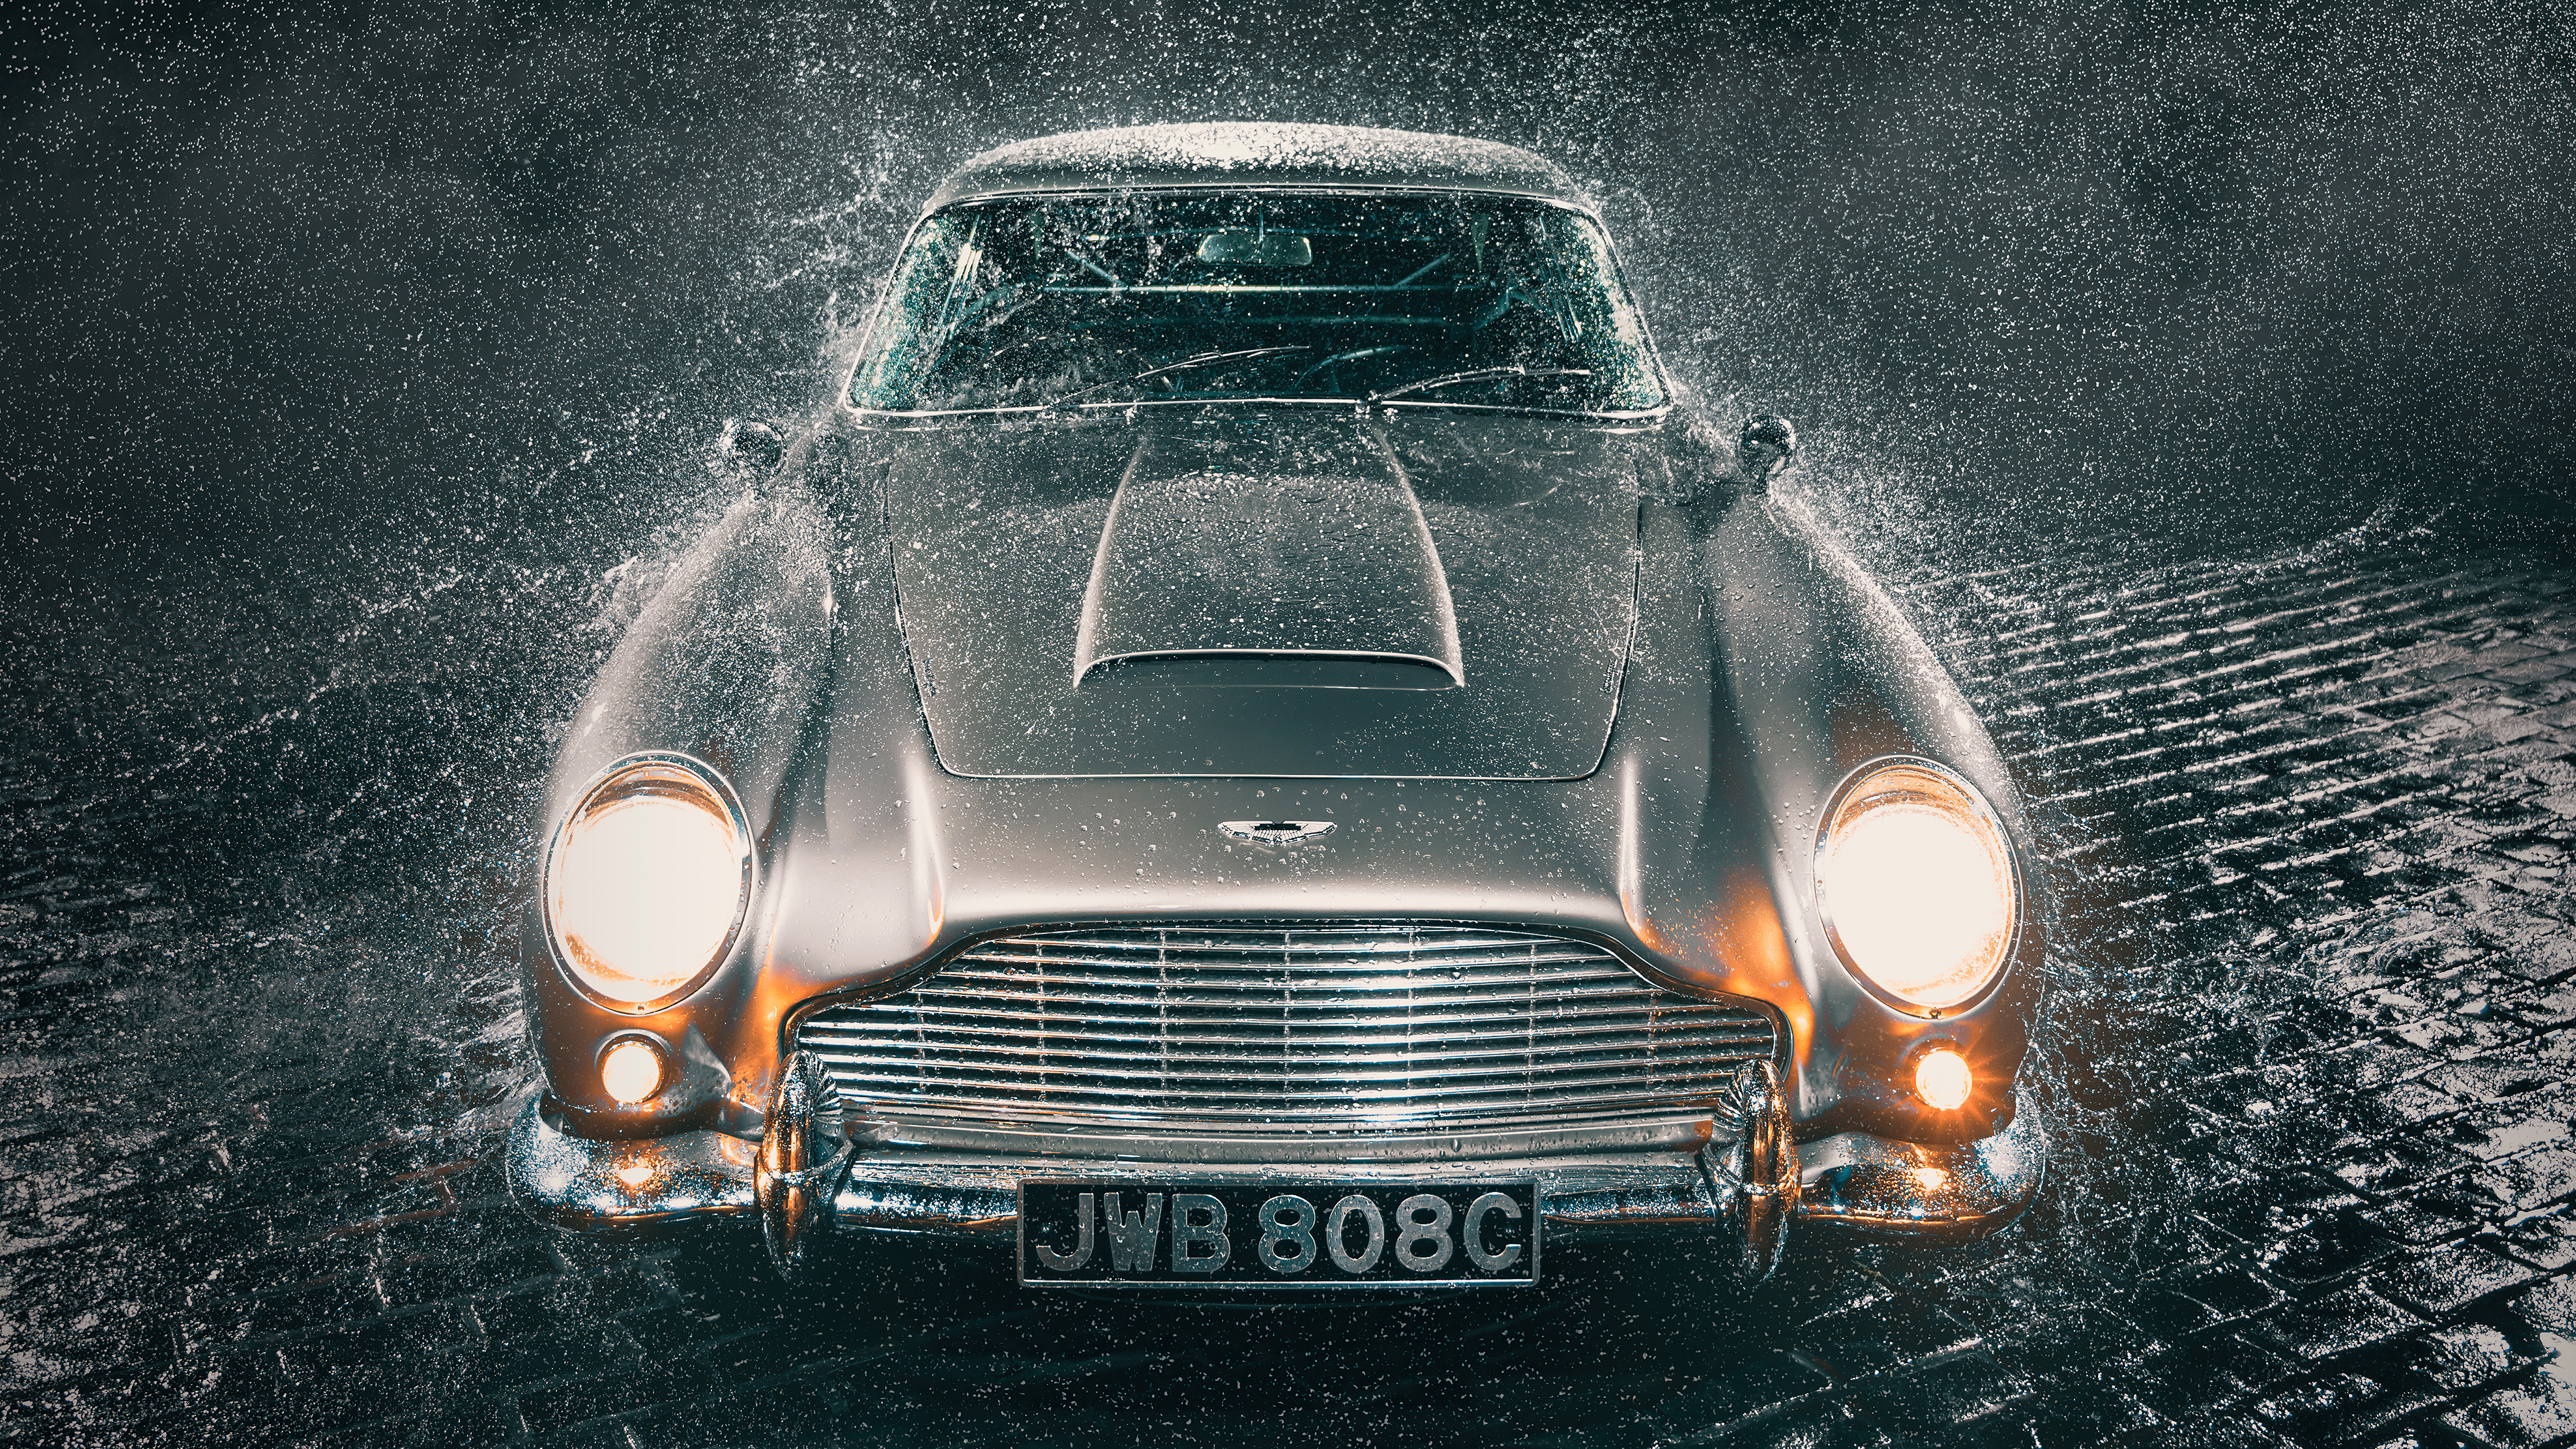 Aston Martin Db5 5k, HD Cars, 4k Wallpapers, Images, Backgrounds, Photos  and Pictures